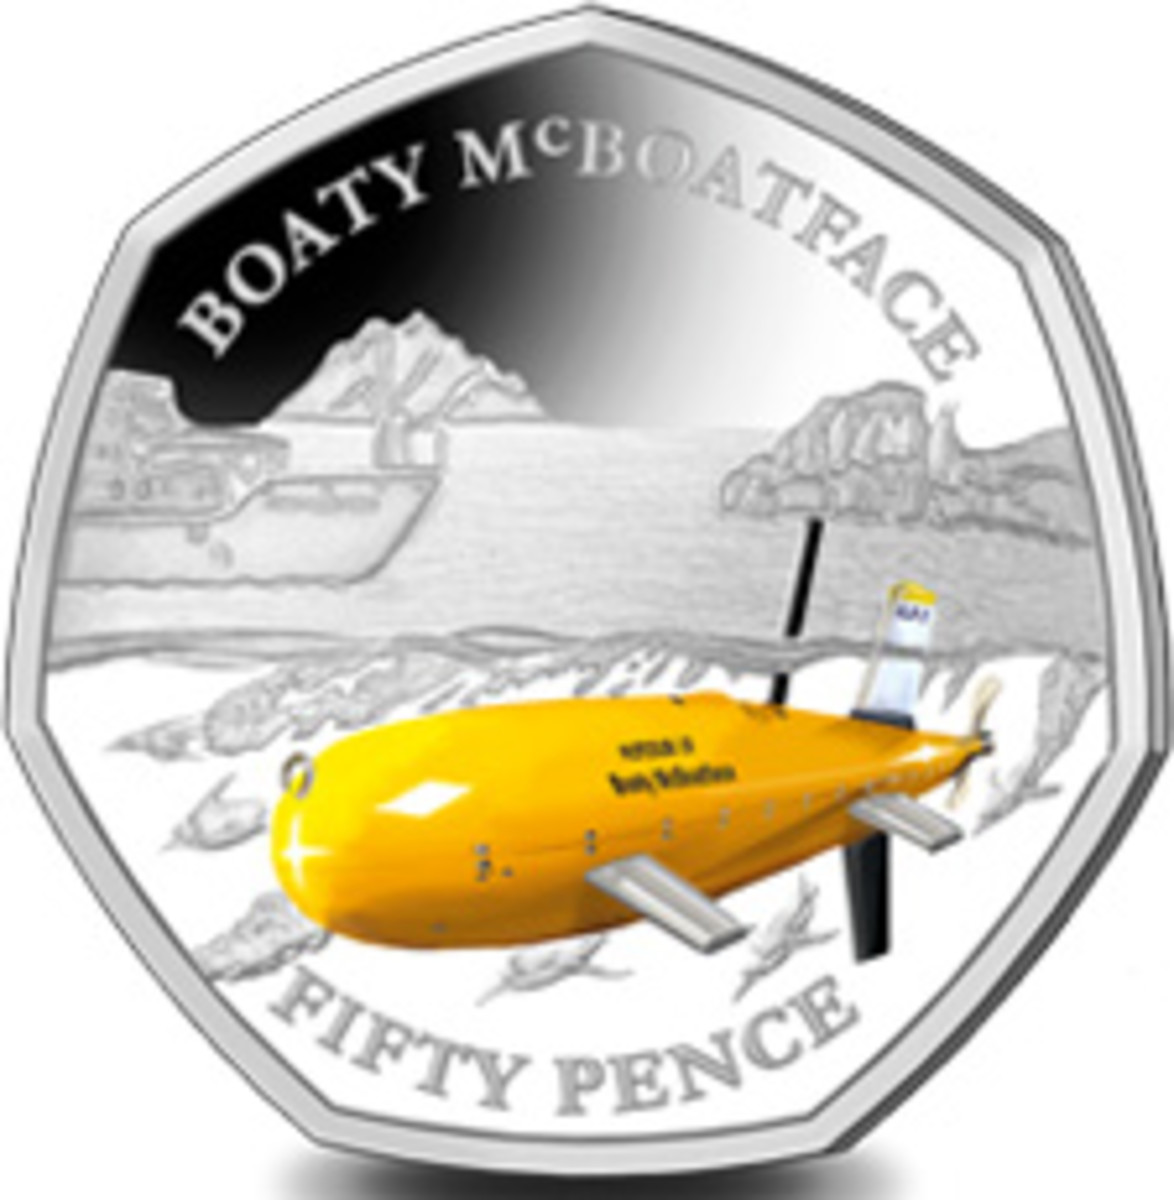  “Boaty McBoatface” has a penguin escort as it explores icebergs in Antarctic waters on the reverse of this first-ever BAT 50 pence. (Image courtesy Pobjoy Mint)